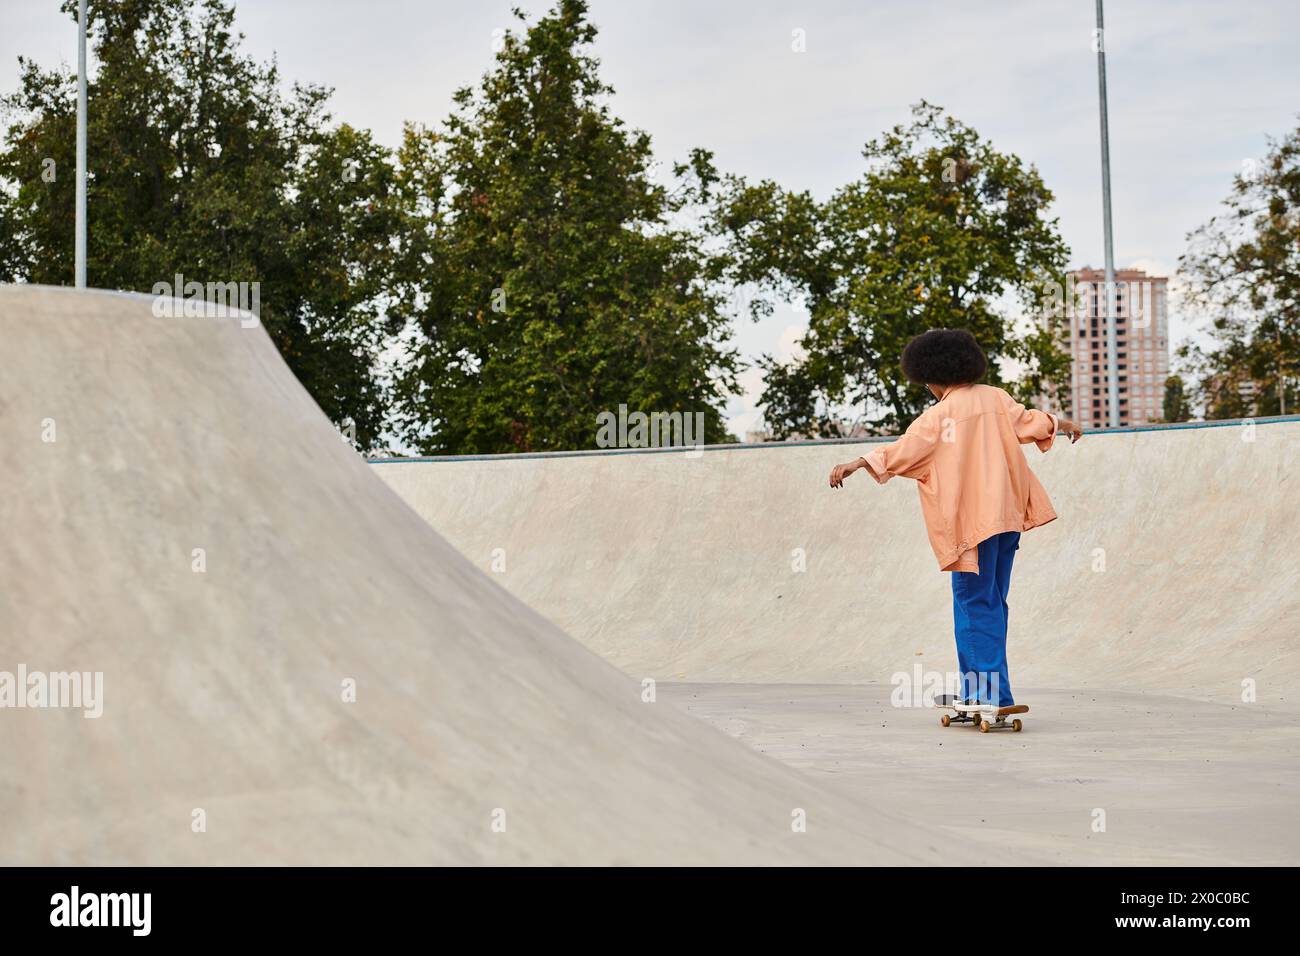 Young African American woman with curly hair rides skateboard in a bright and lively outdoor skate park setting. Stock Photo